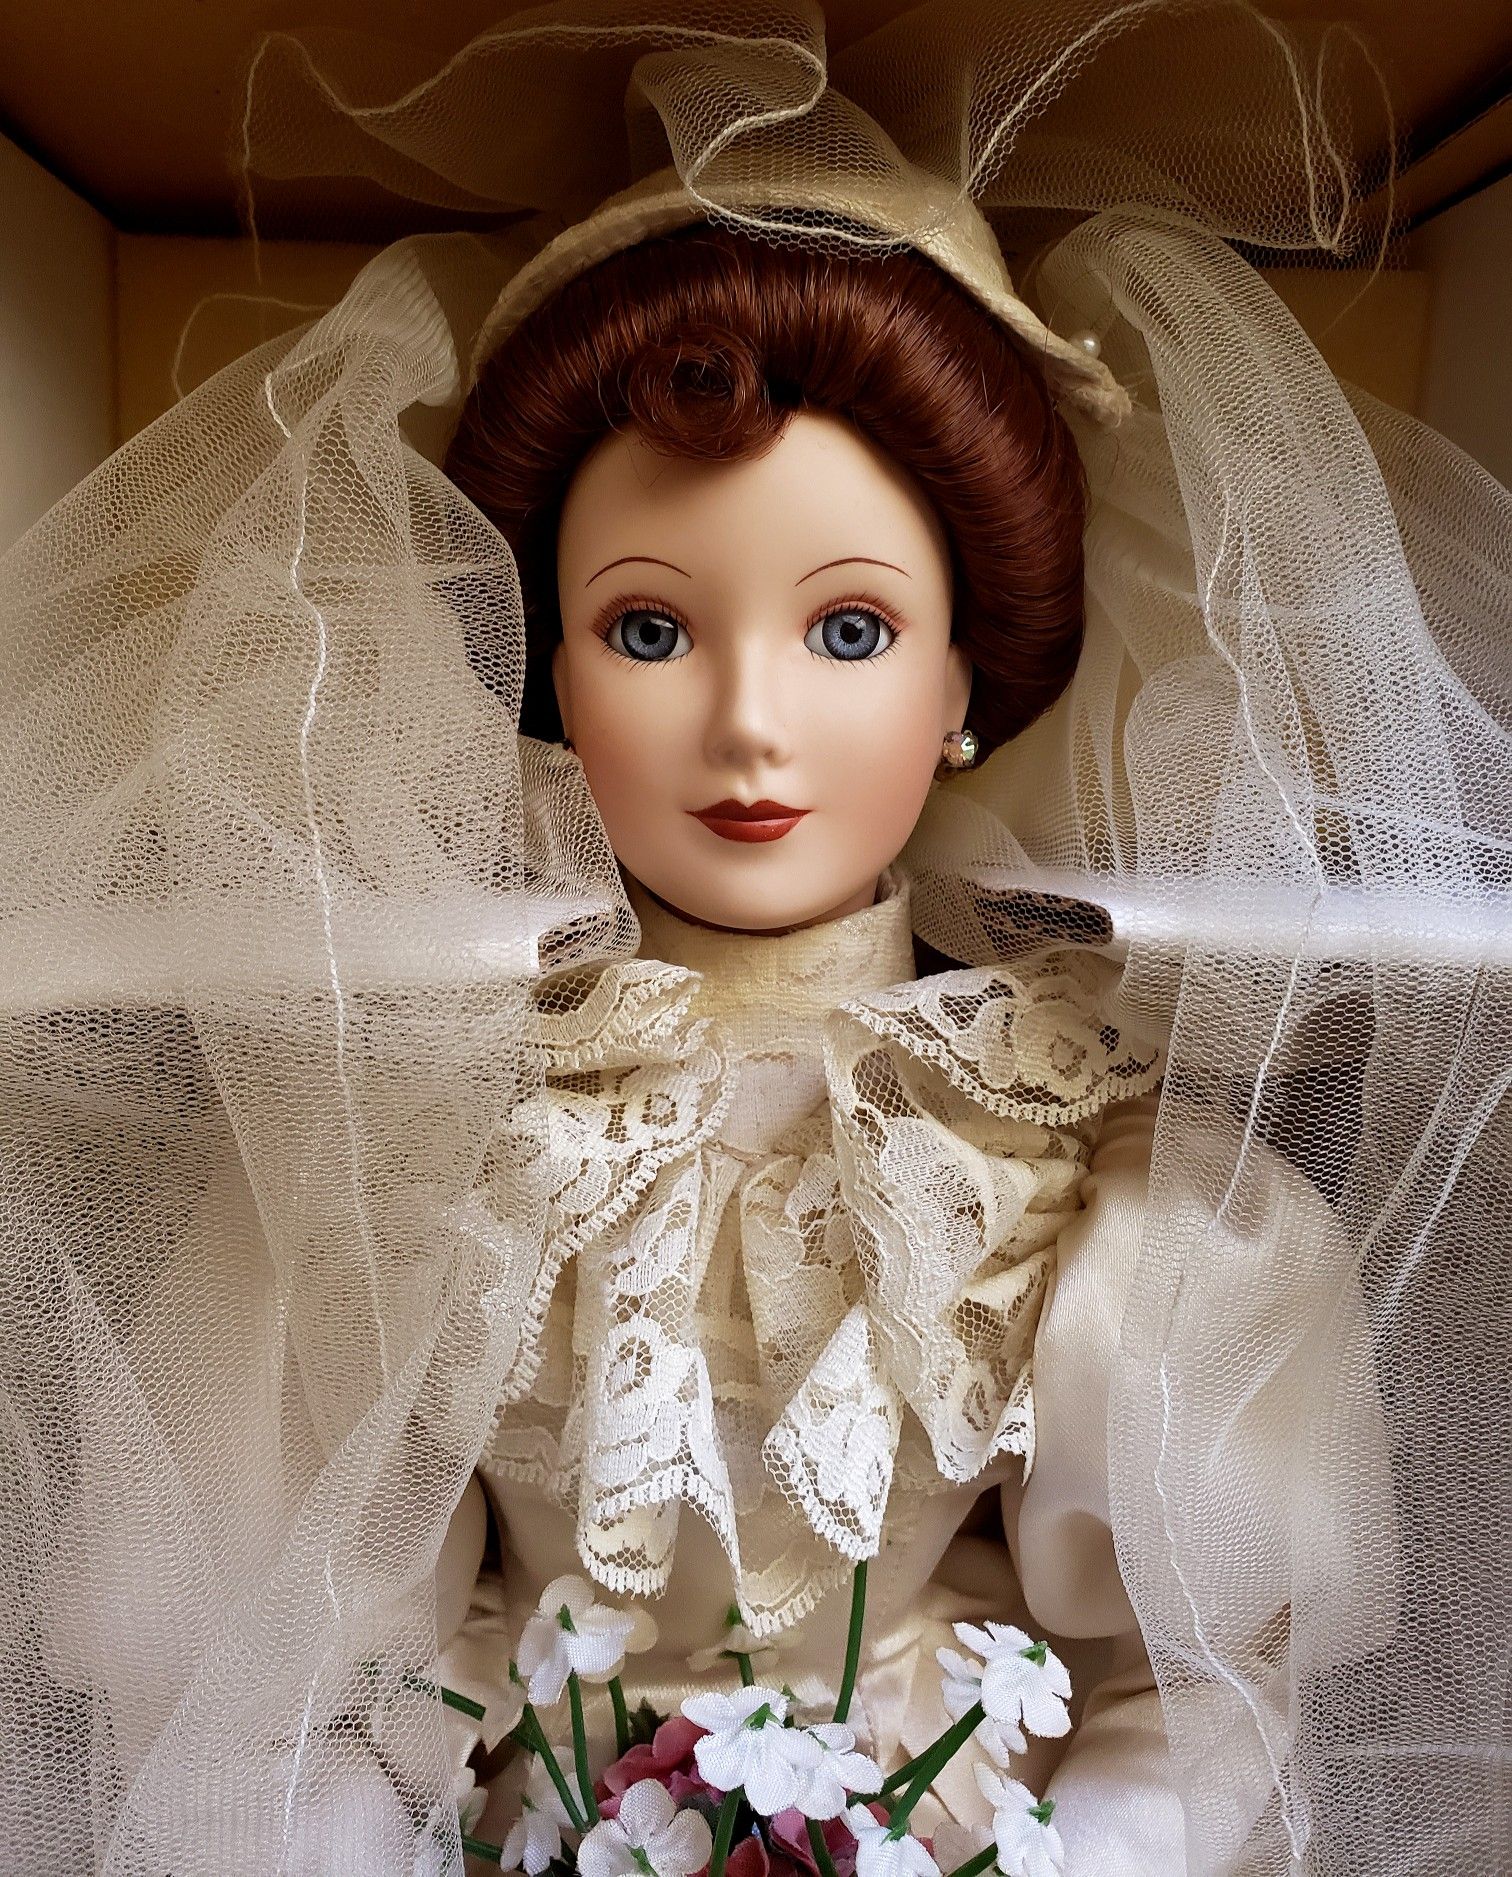 New Beautiful Porcelain Doll By The Ashton - Drake Galleries